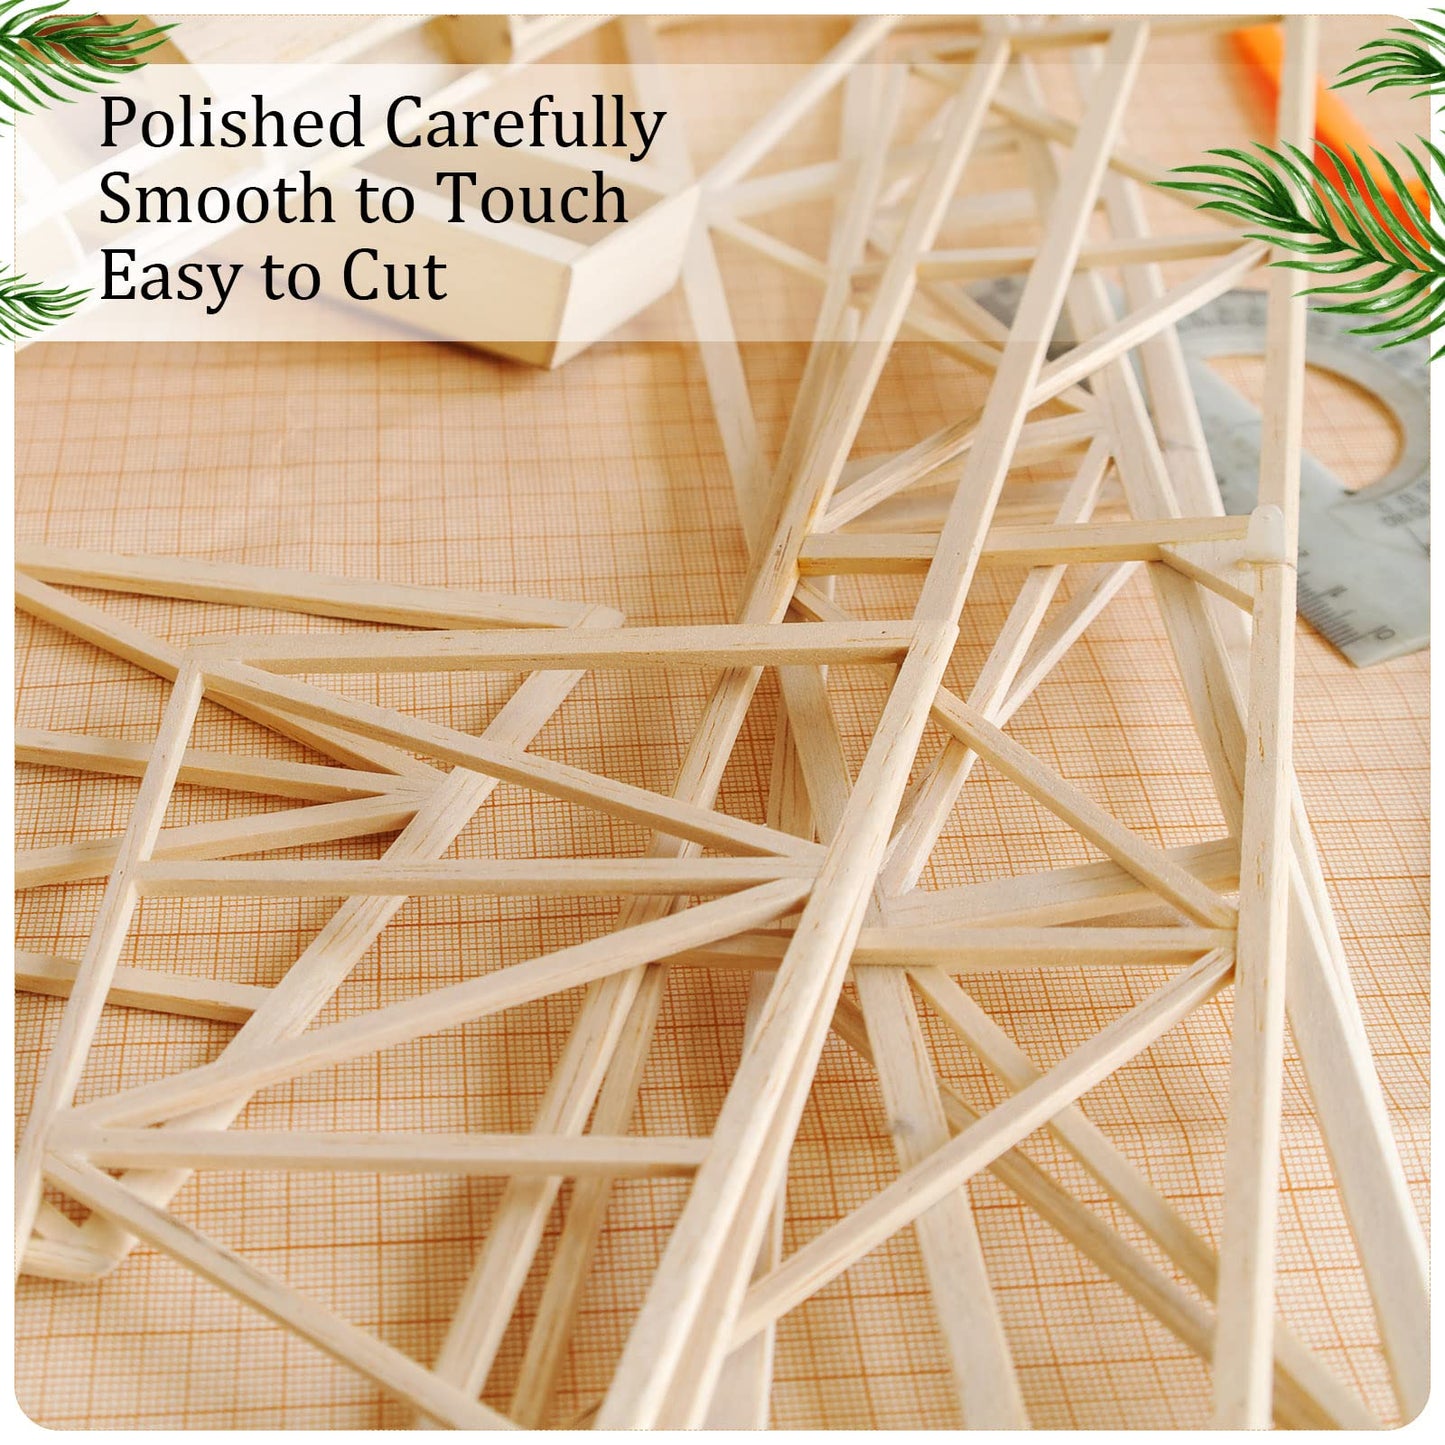 120 Pieces Balsa Wood Sticks 1/4 x 1/4 x 12 Inch Balsa Wood Strips Hardwood Square Wooden Dowels Unfinished Balsa Wood Strips for Craft DIY Supplies